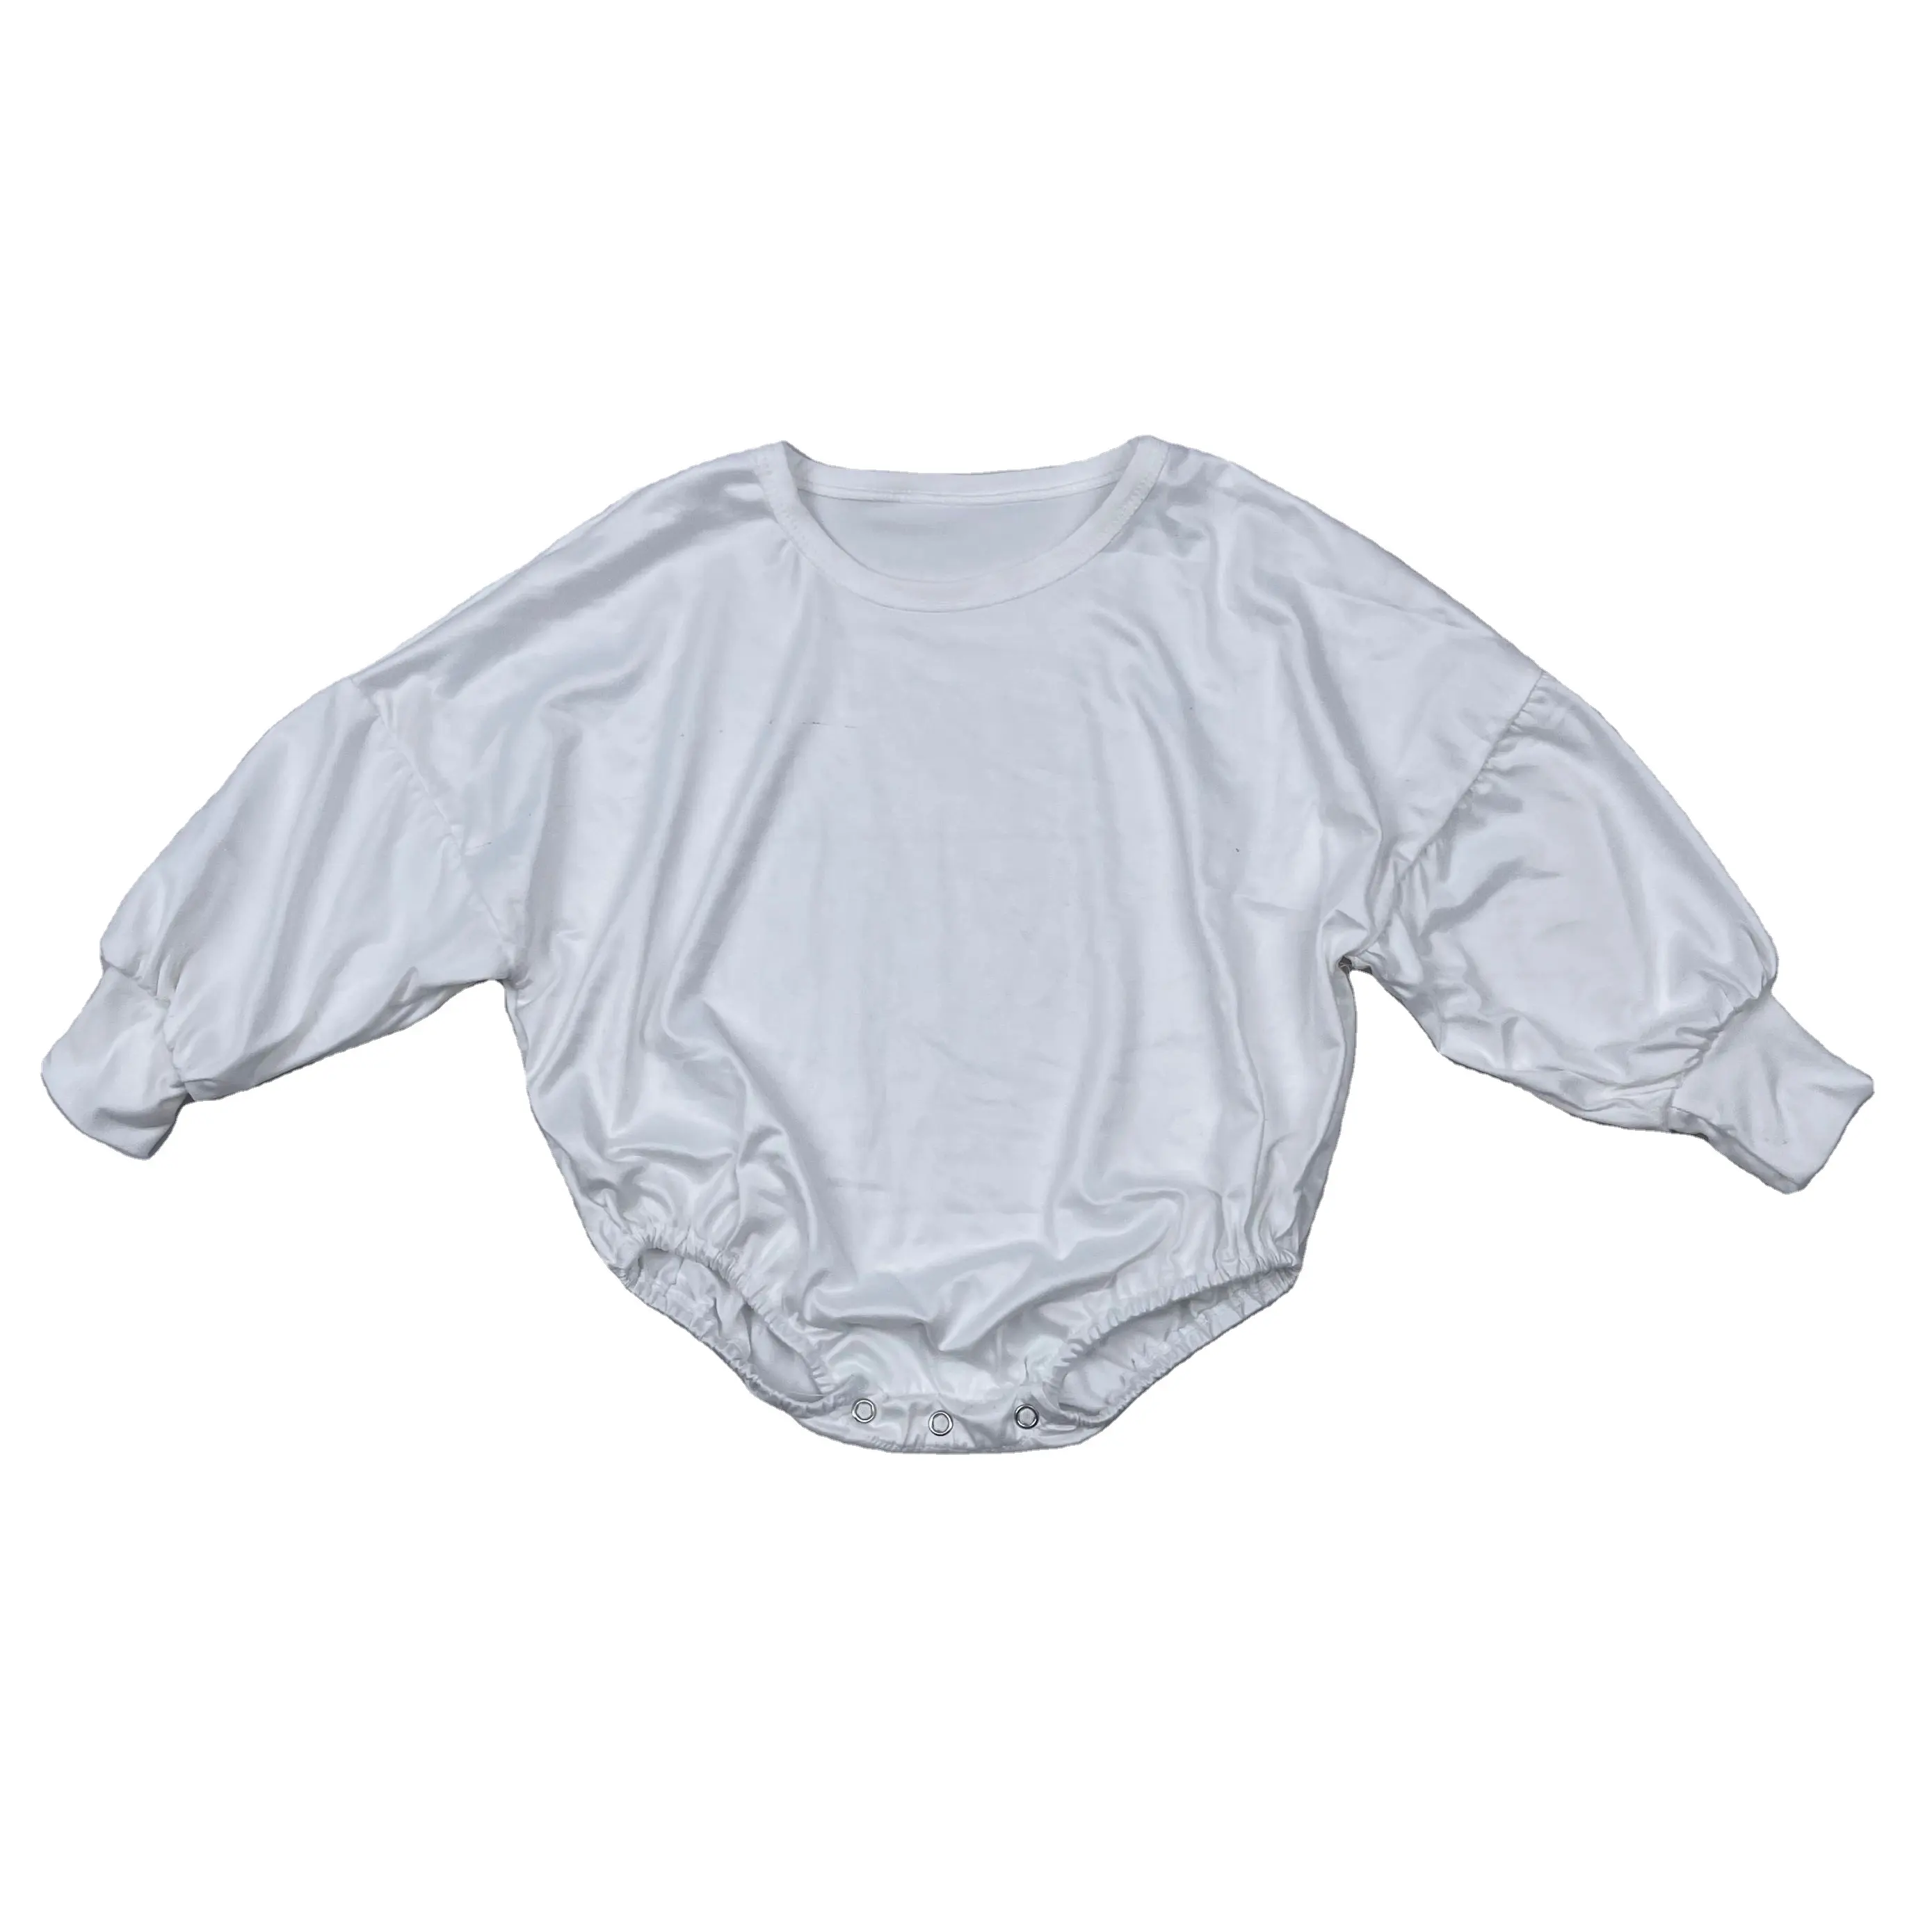 Wholesale Blank Clothes Baby Bubble Romper Long Sleeve Tshirt Romper White Bubble Oversized Romper